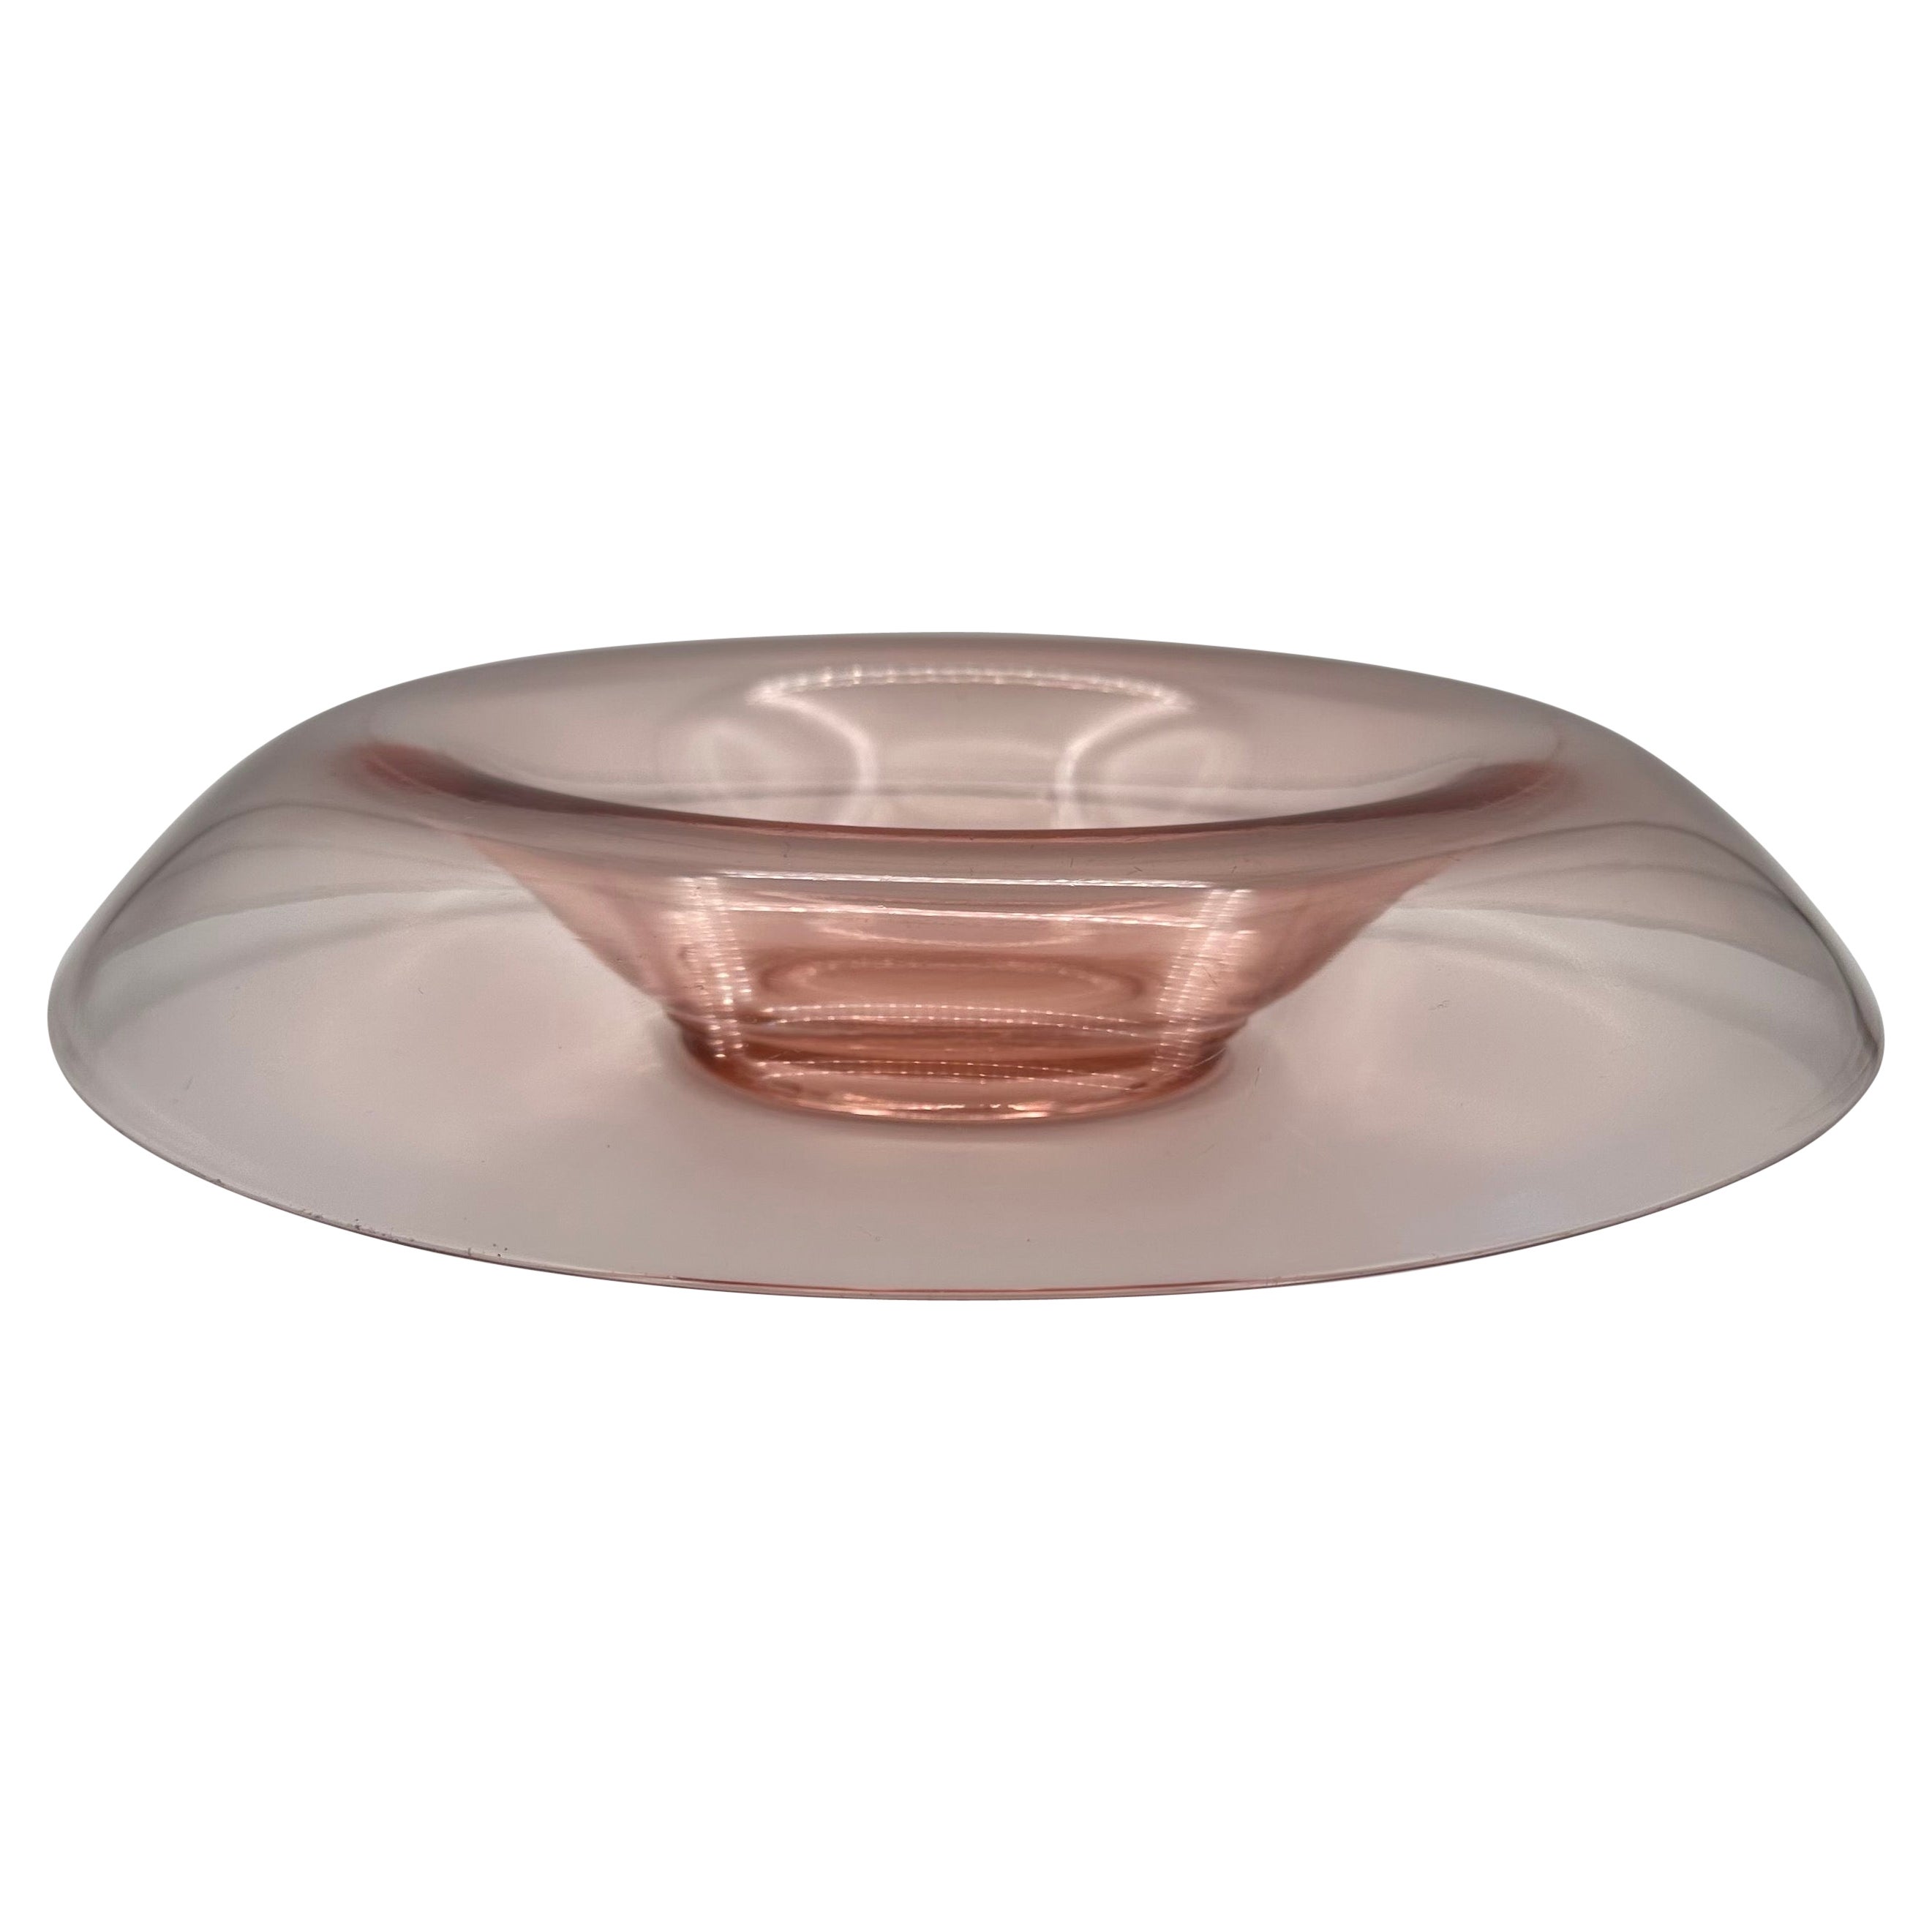 Vintage Pink Glass Round Centerpiece Bowl with Curved Waterfall Shape